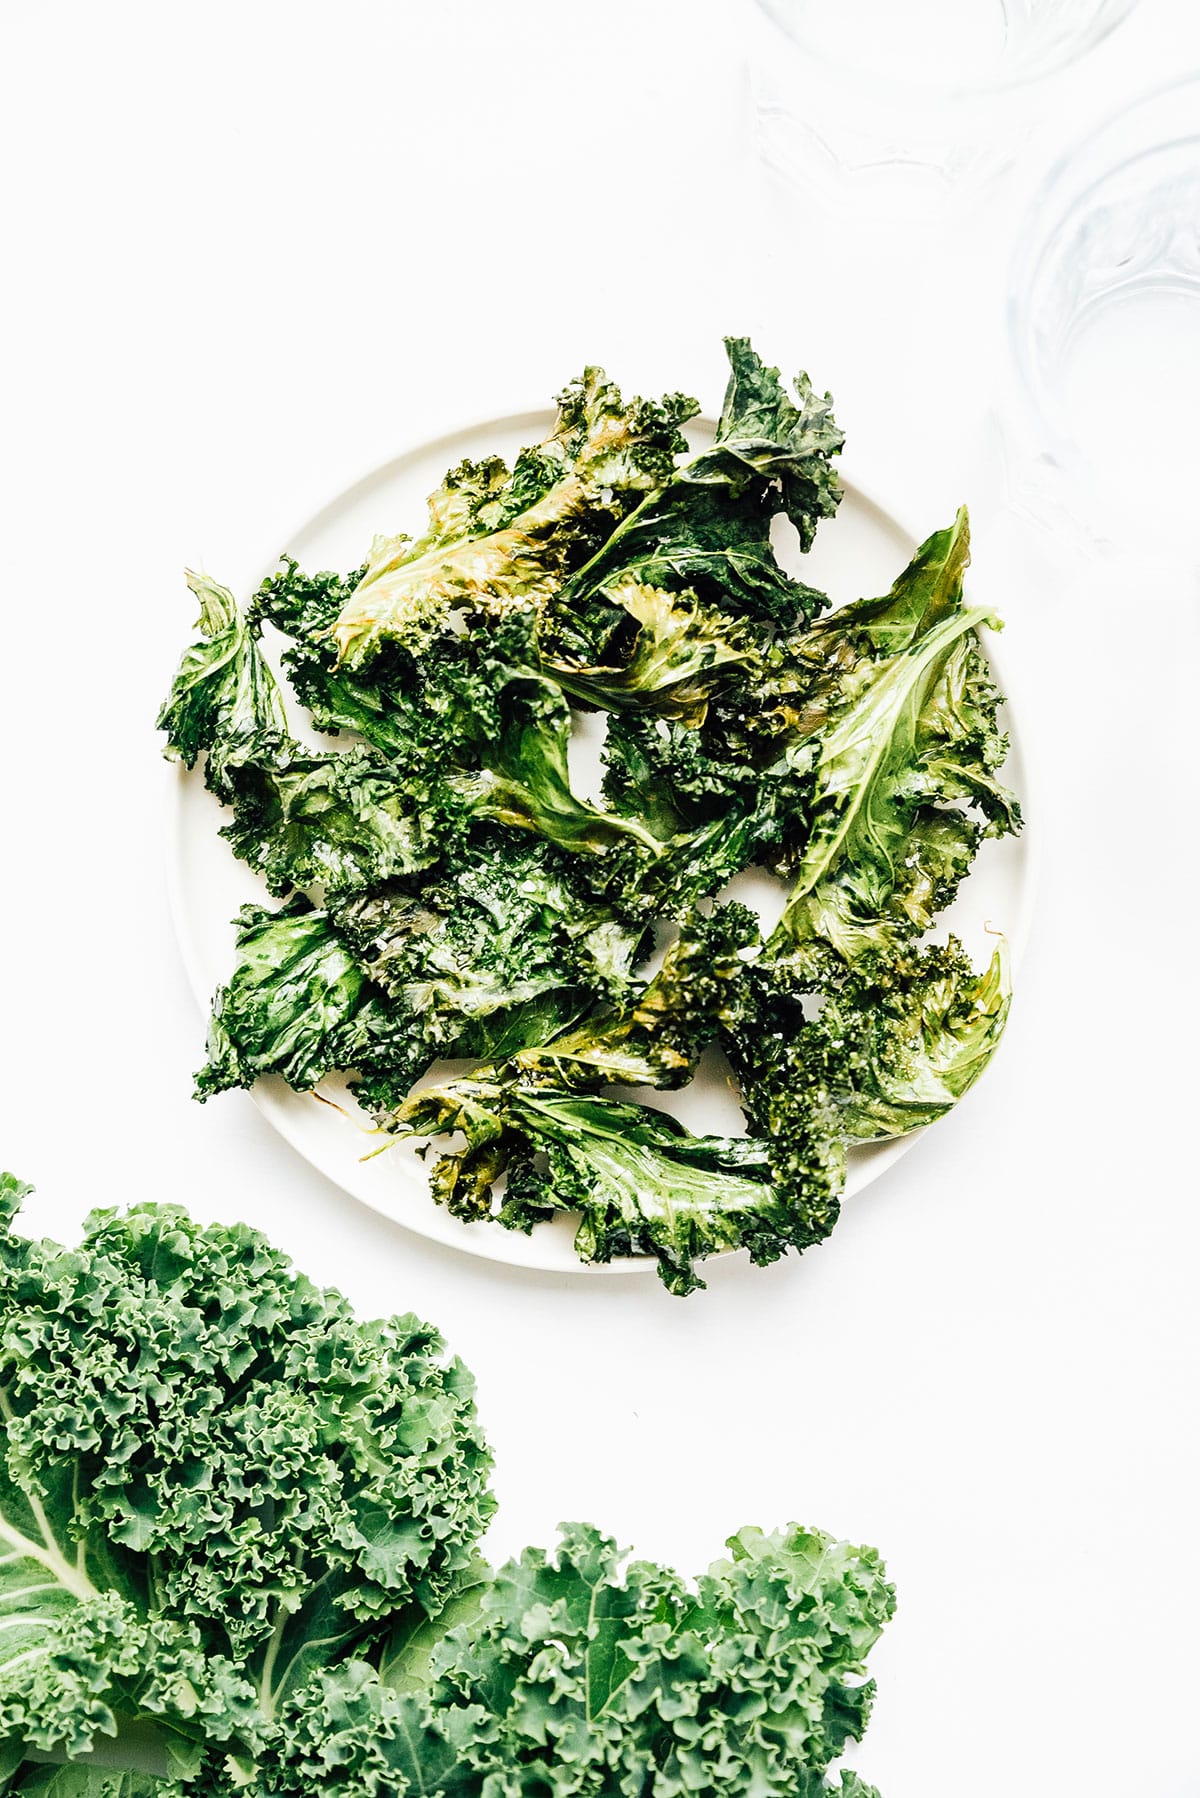 Kale chips on a white plate.